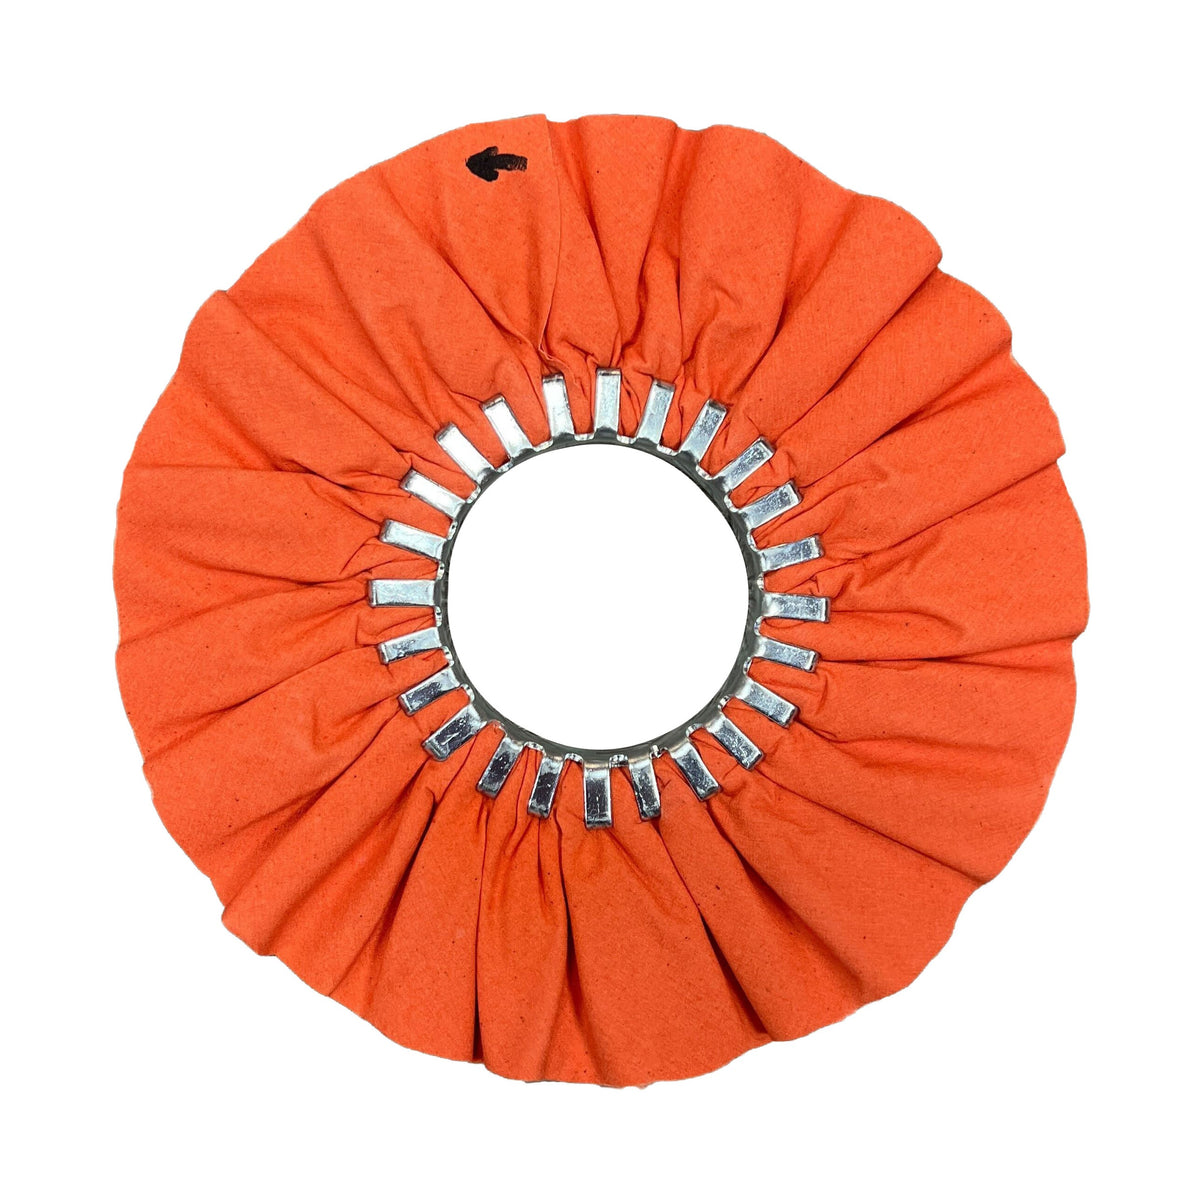 Renegade Products USA Orange Airway Buffing Wheel - Premium Buffing Tool for Exceptional Polishing and Finishing Performance